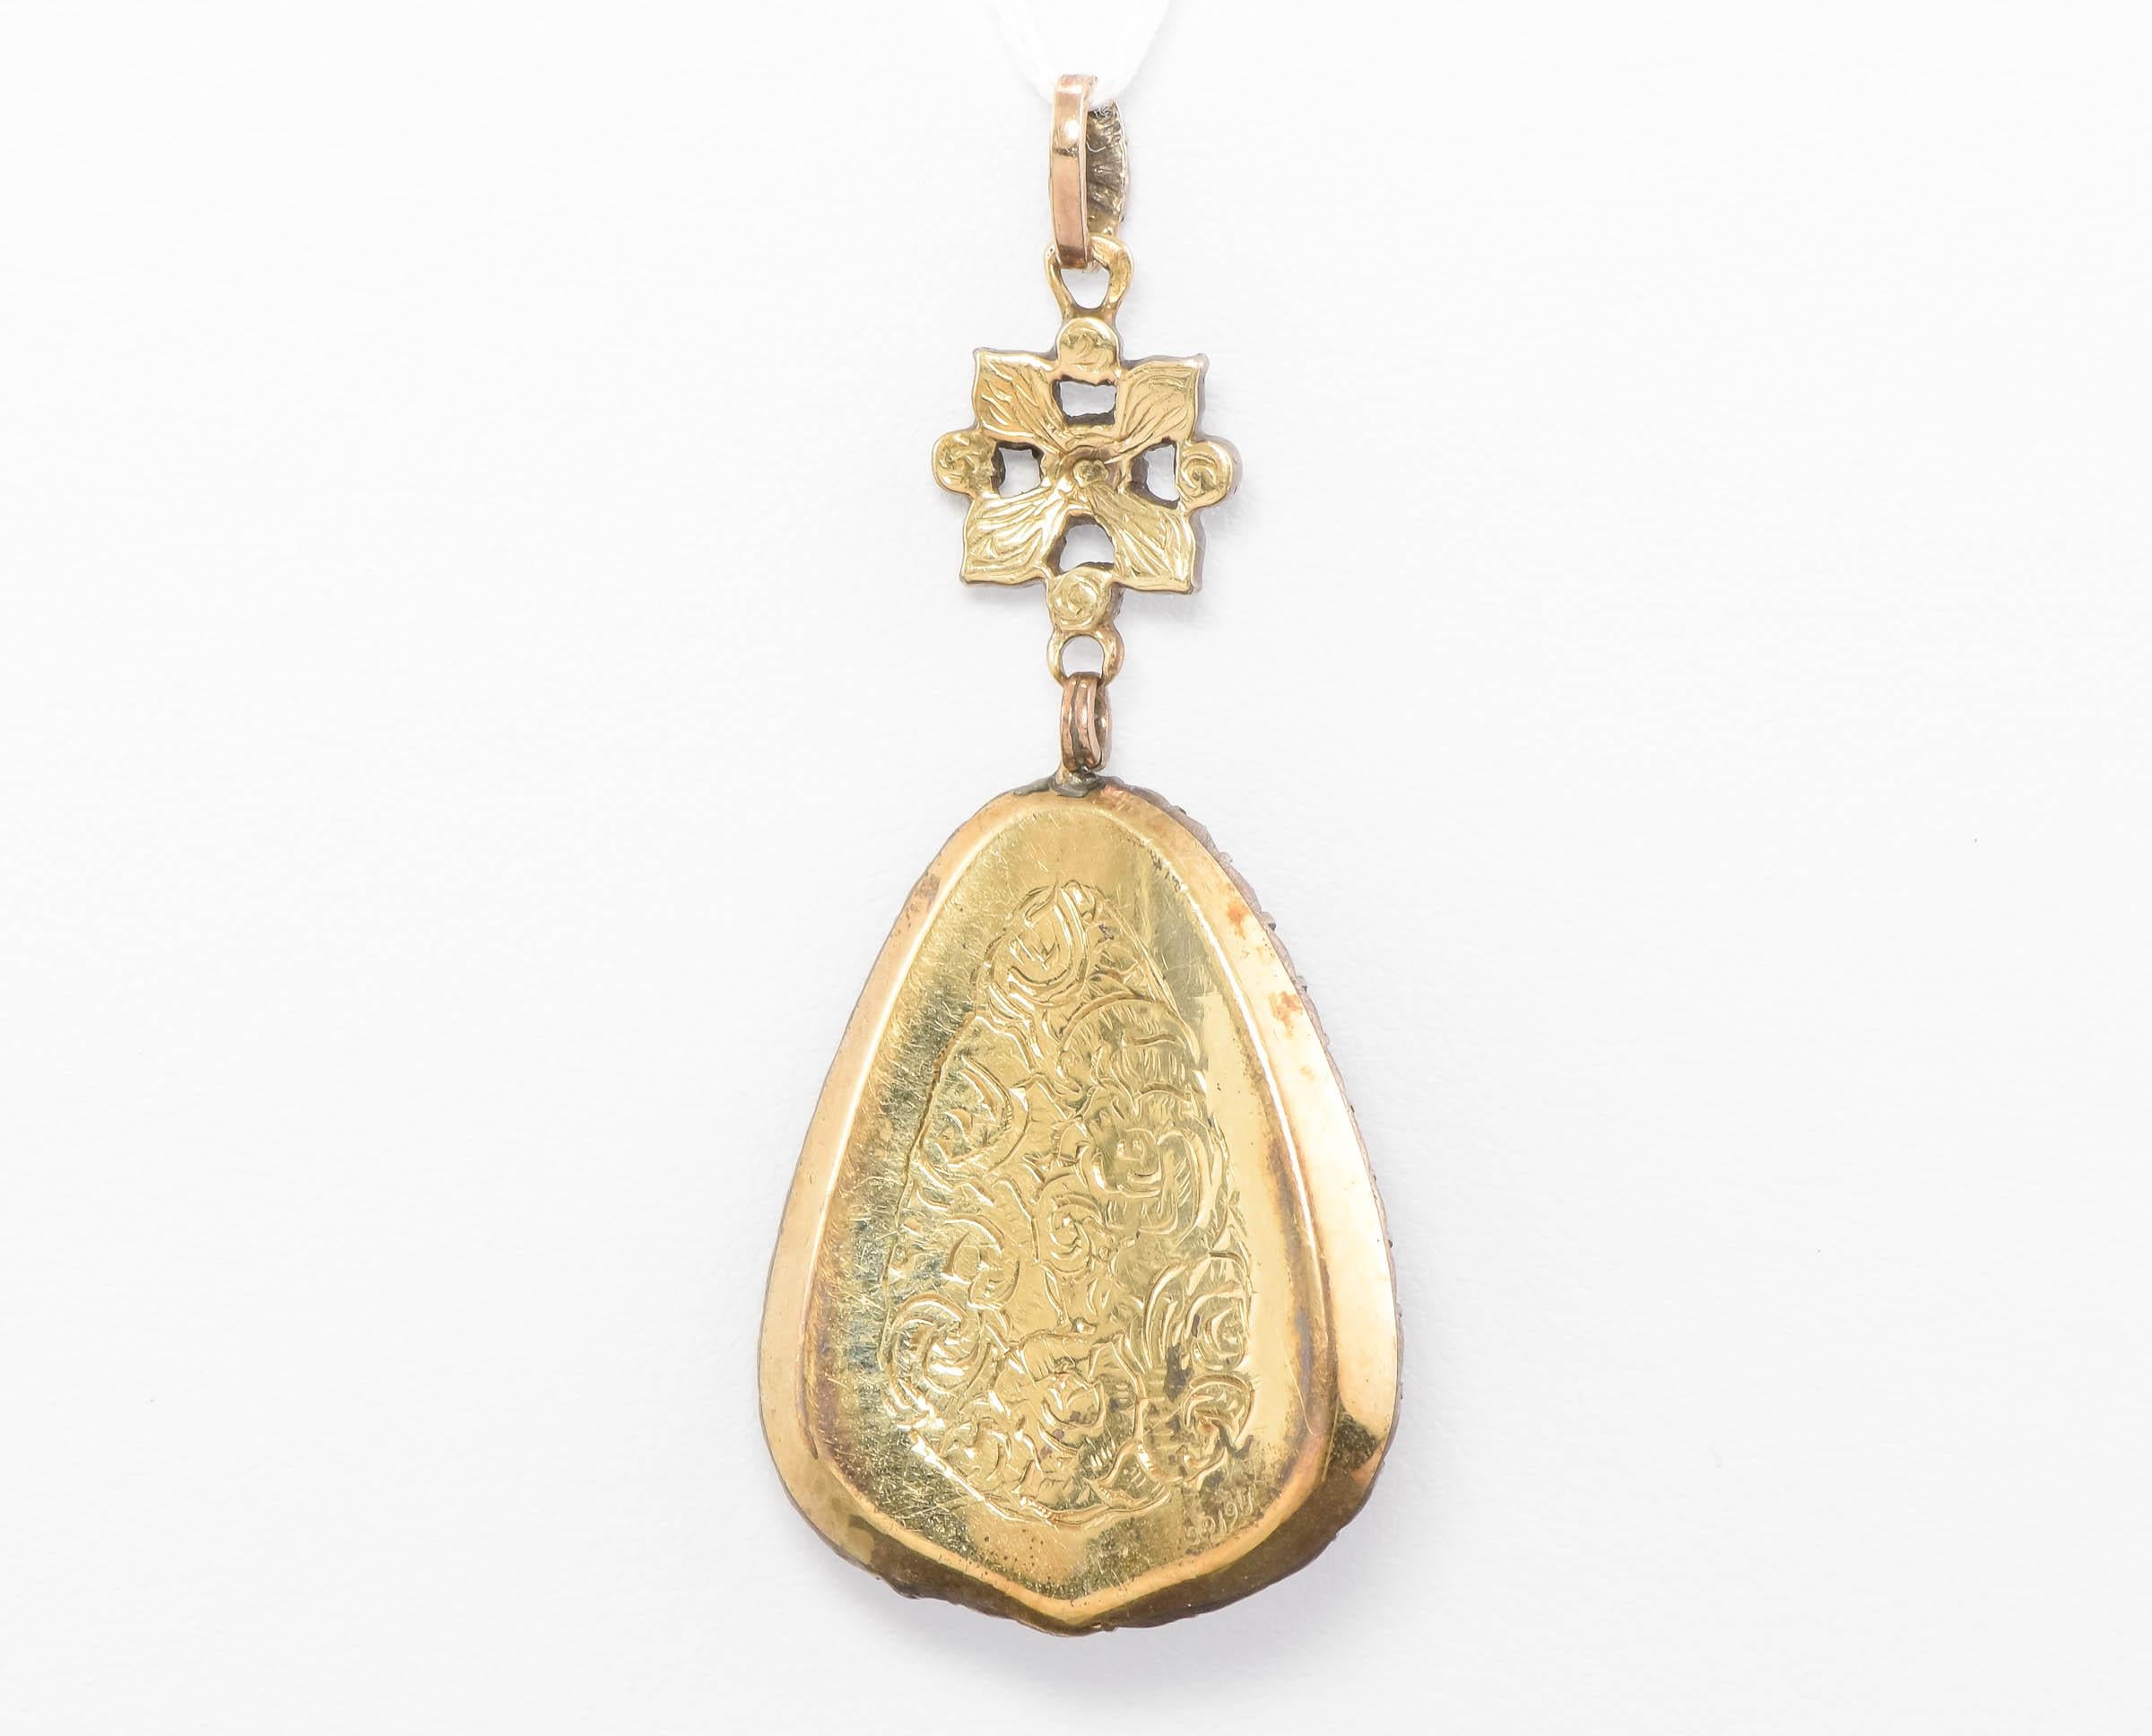 Absolutely stunning and a rare find, this original Georgian period Diamond Pendant with Bristol Blue Glass is gorgeous for the collector but is still very wearable, as well.

Crafted of yellow gold testing between 15K and 18K for me, with silver